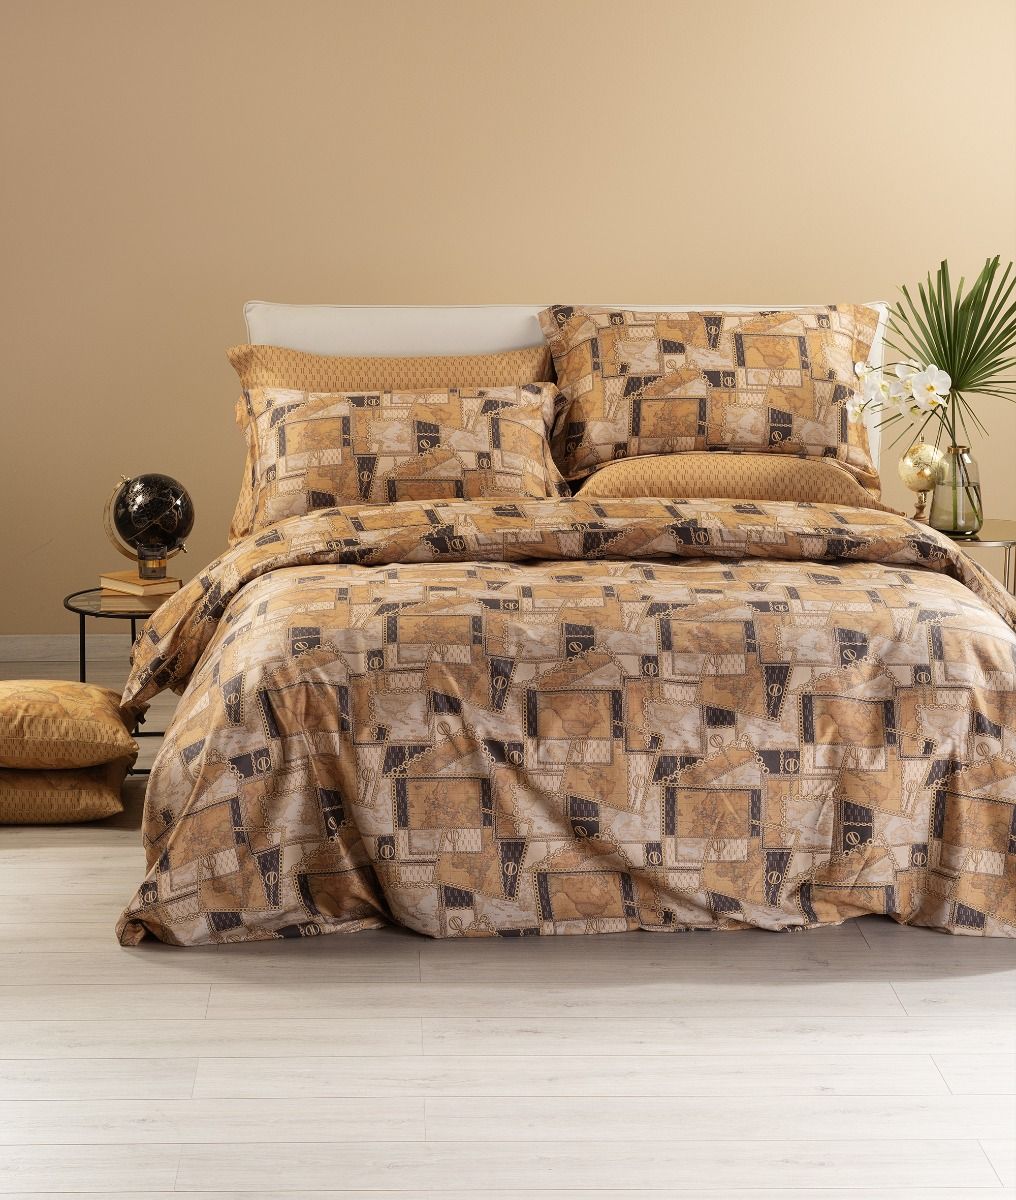 Geo Gold Chain double comforter cover set,front